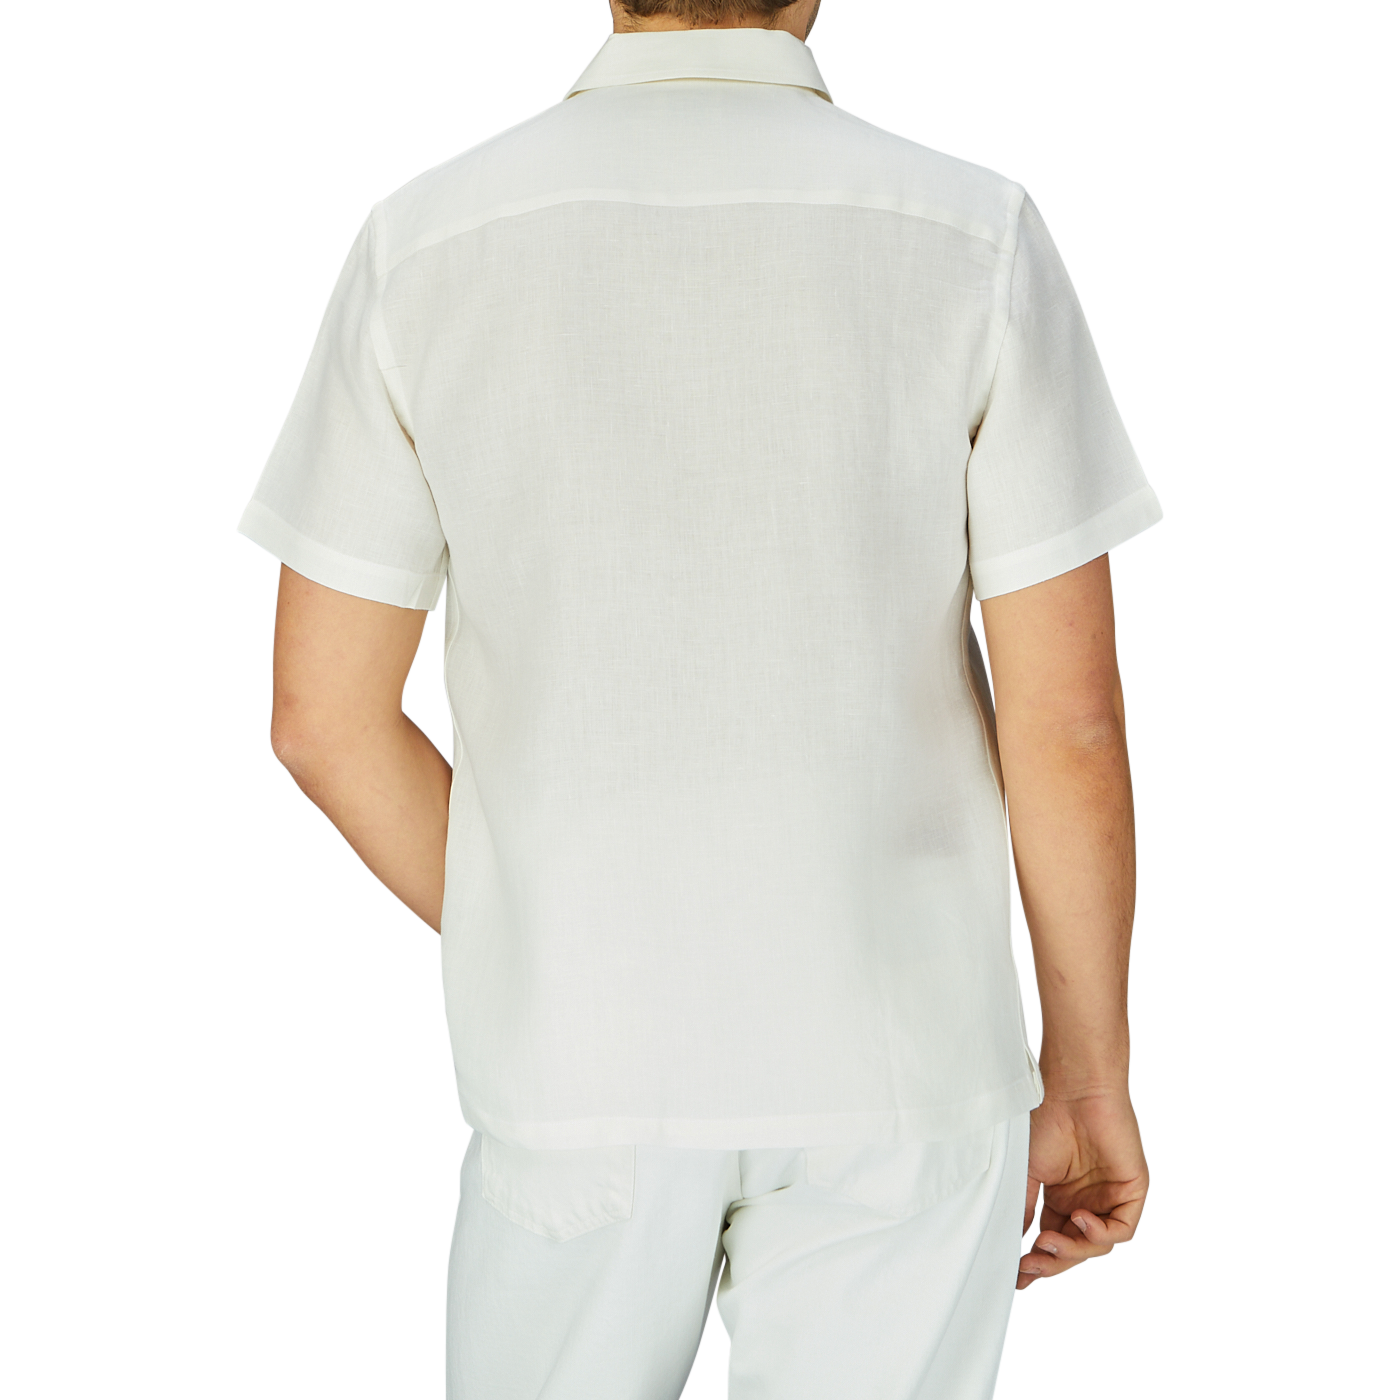 Rear view of a person wearing an Off White Linen Floral Embroidered Shirt by De Bonne Facture and white pants against a plain background.